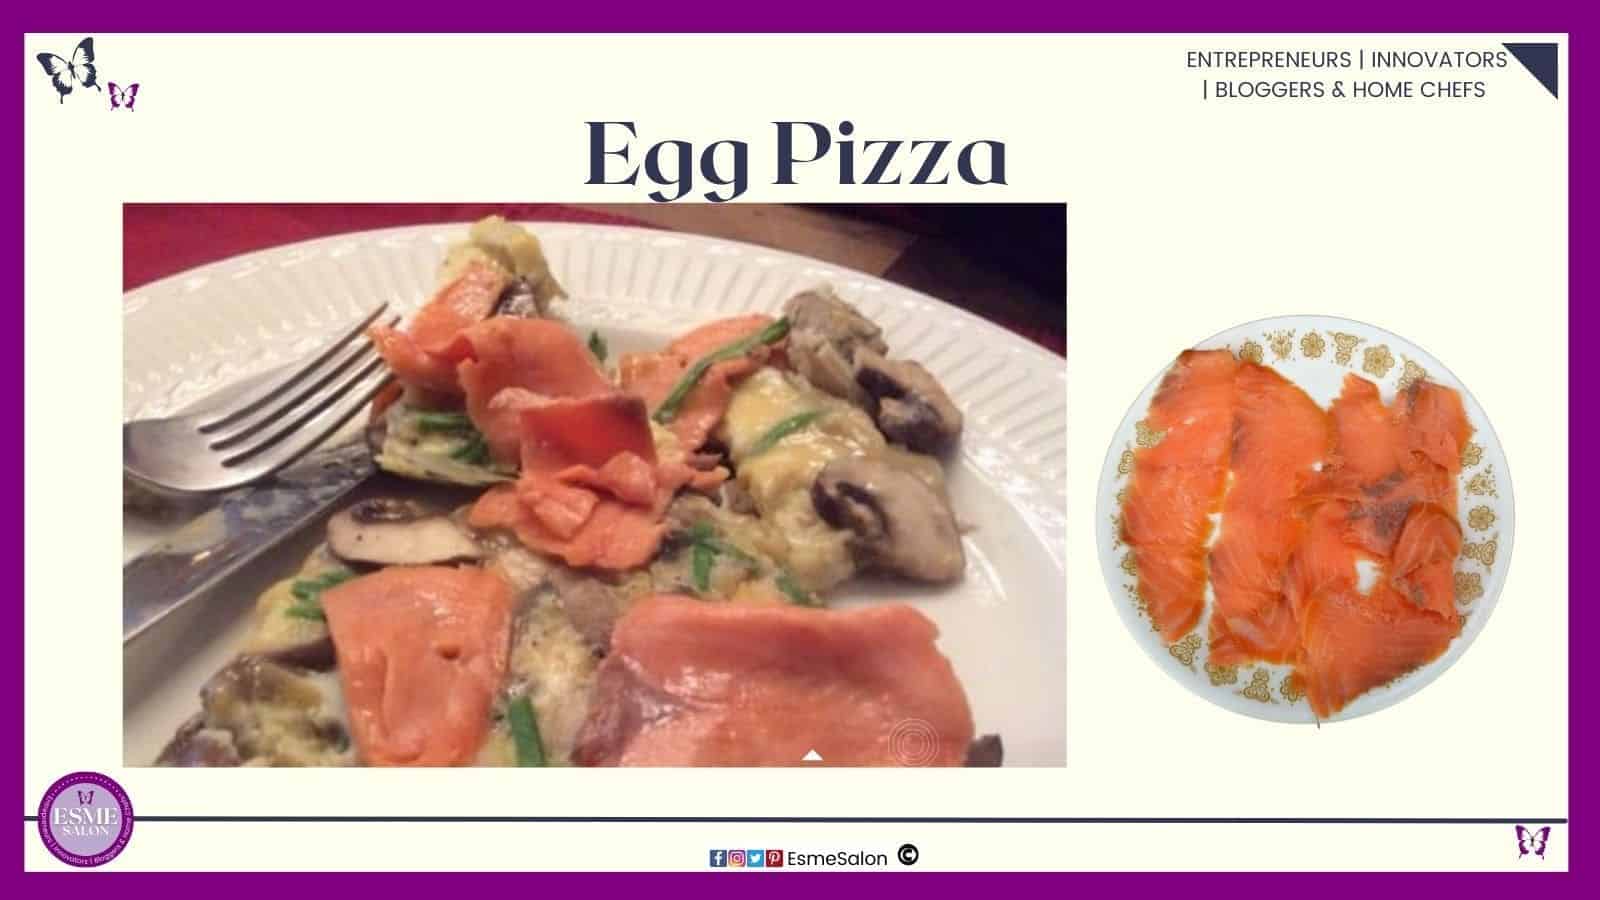 an image of a white plate with an egg pizza with lots of veggies and topped with lox